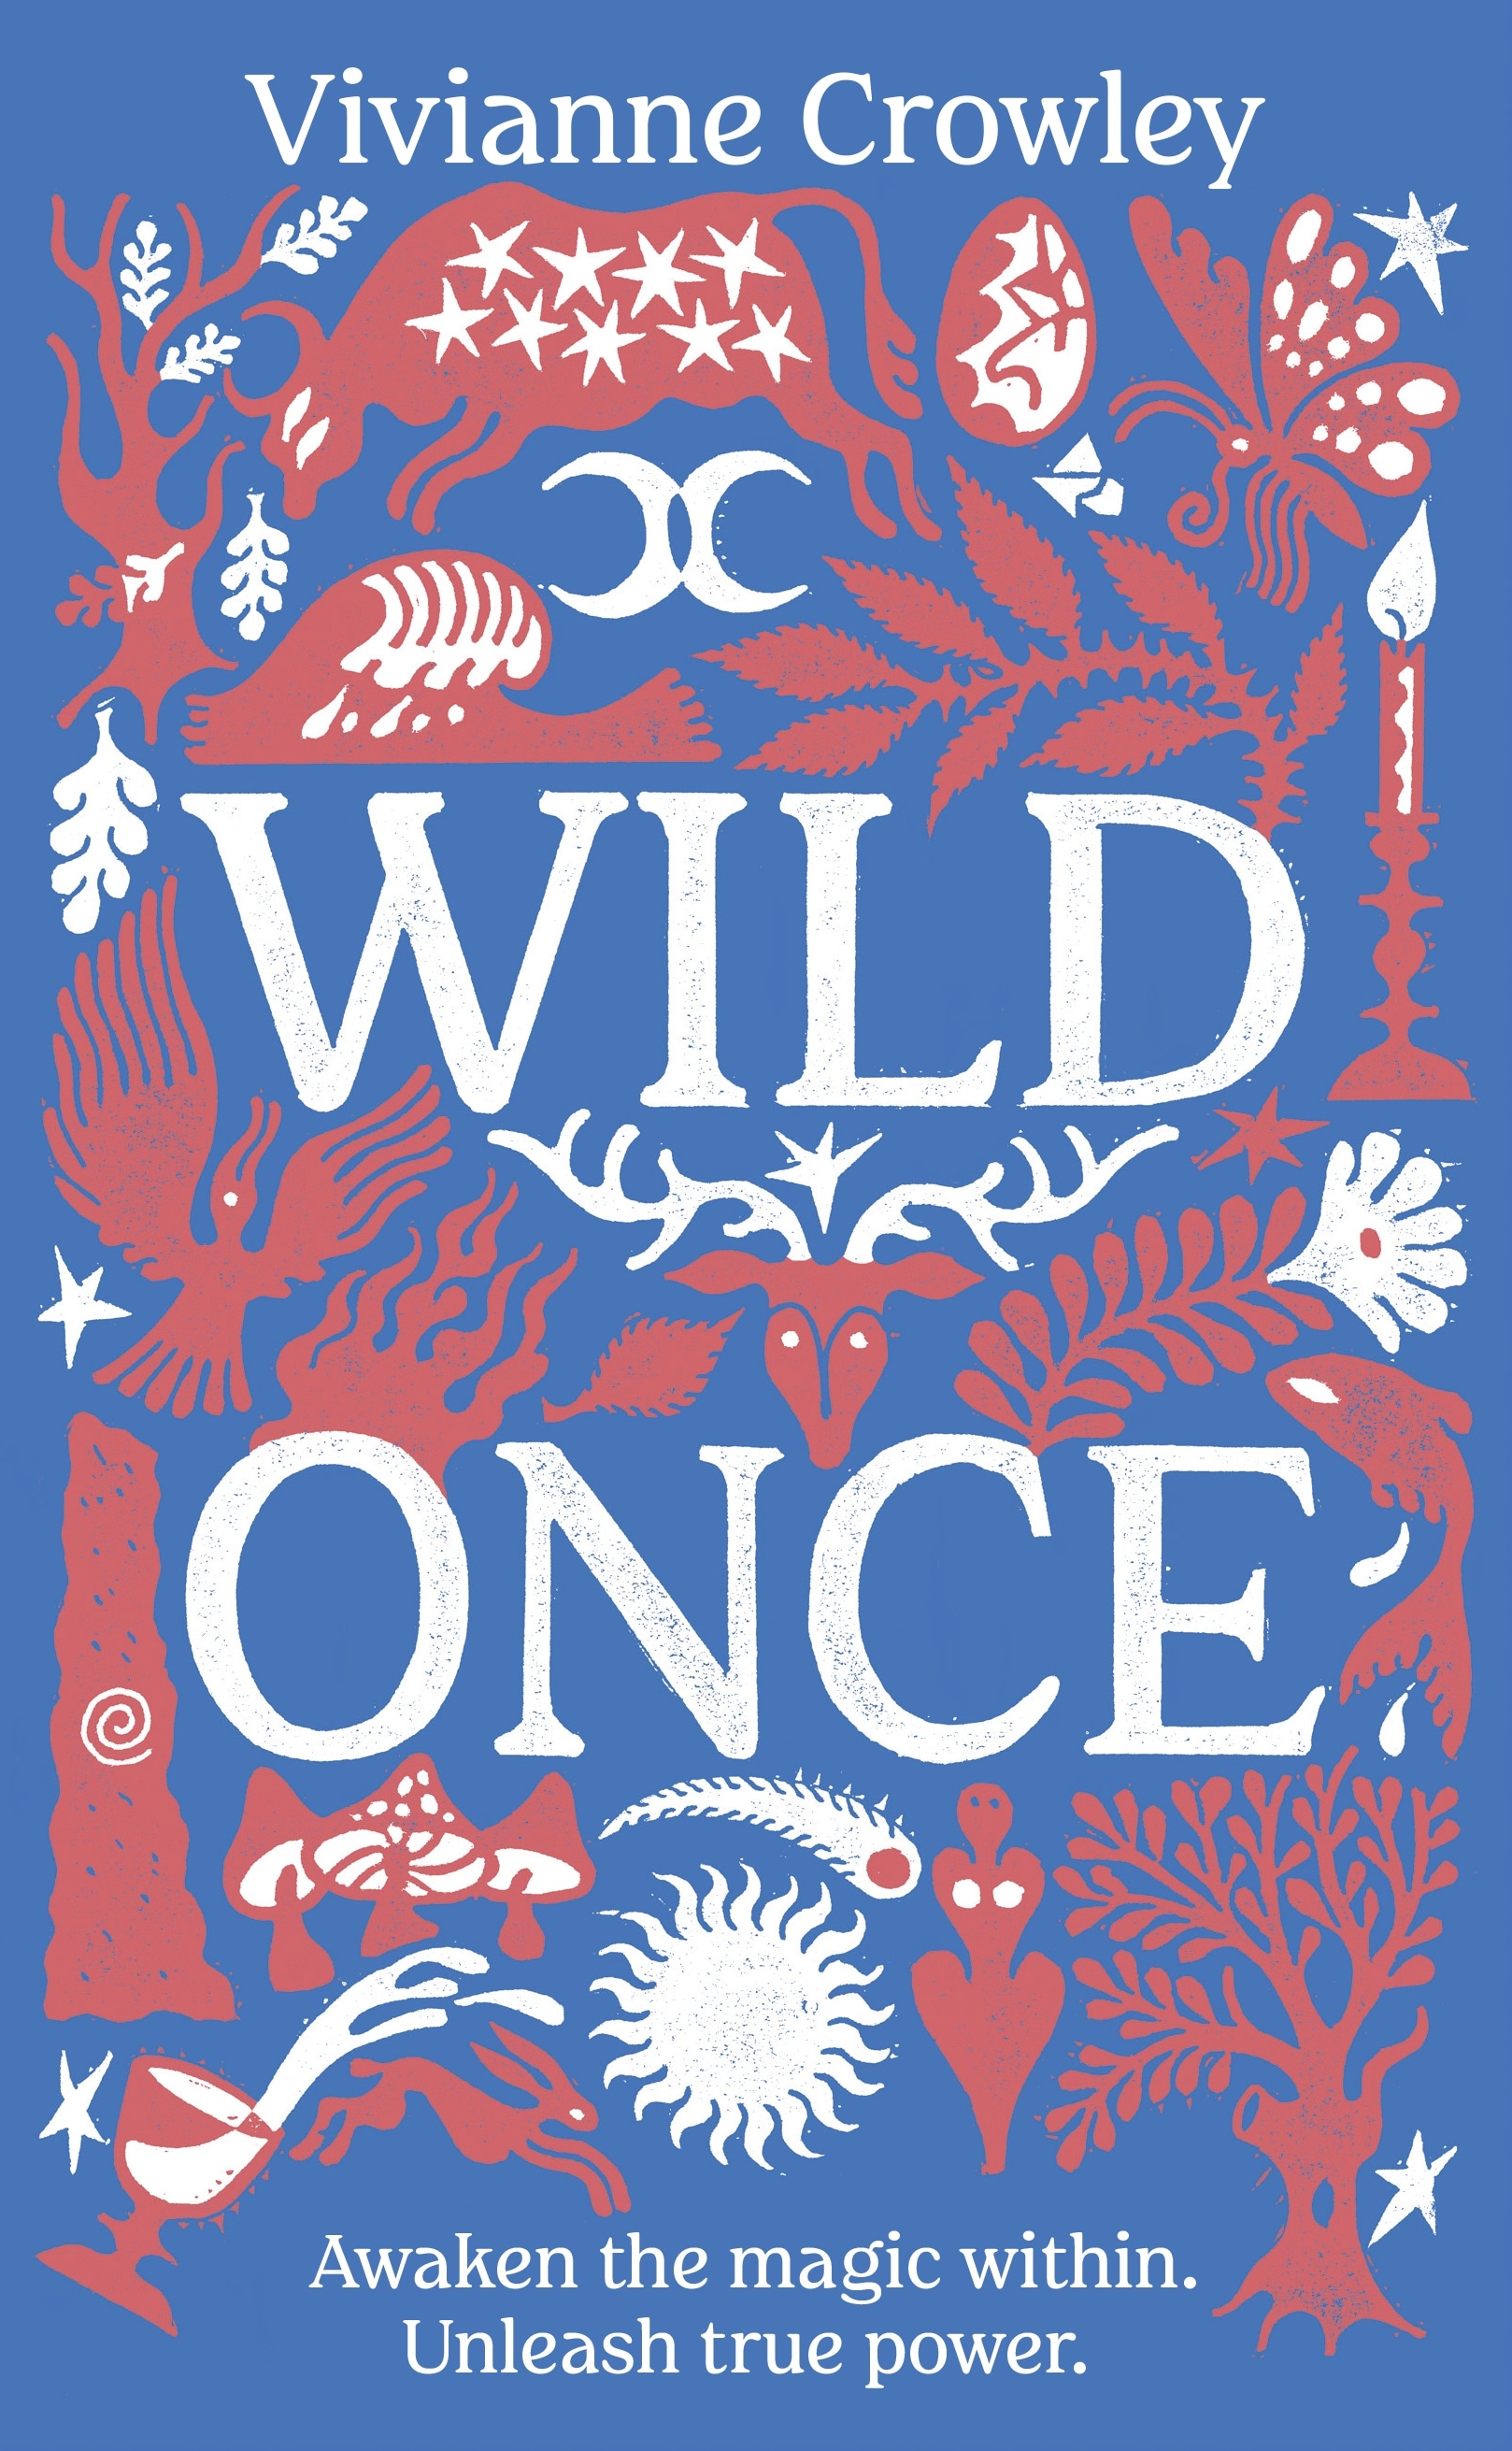 Book “Wild Once” by Vivianne Crowley — March 10, 2022